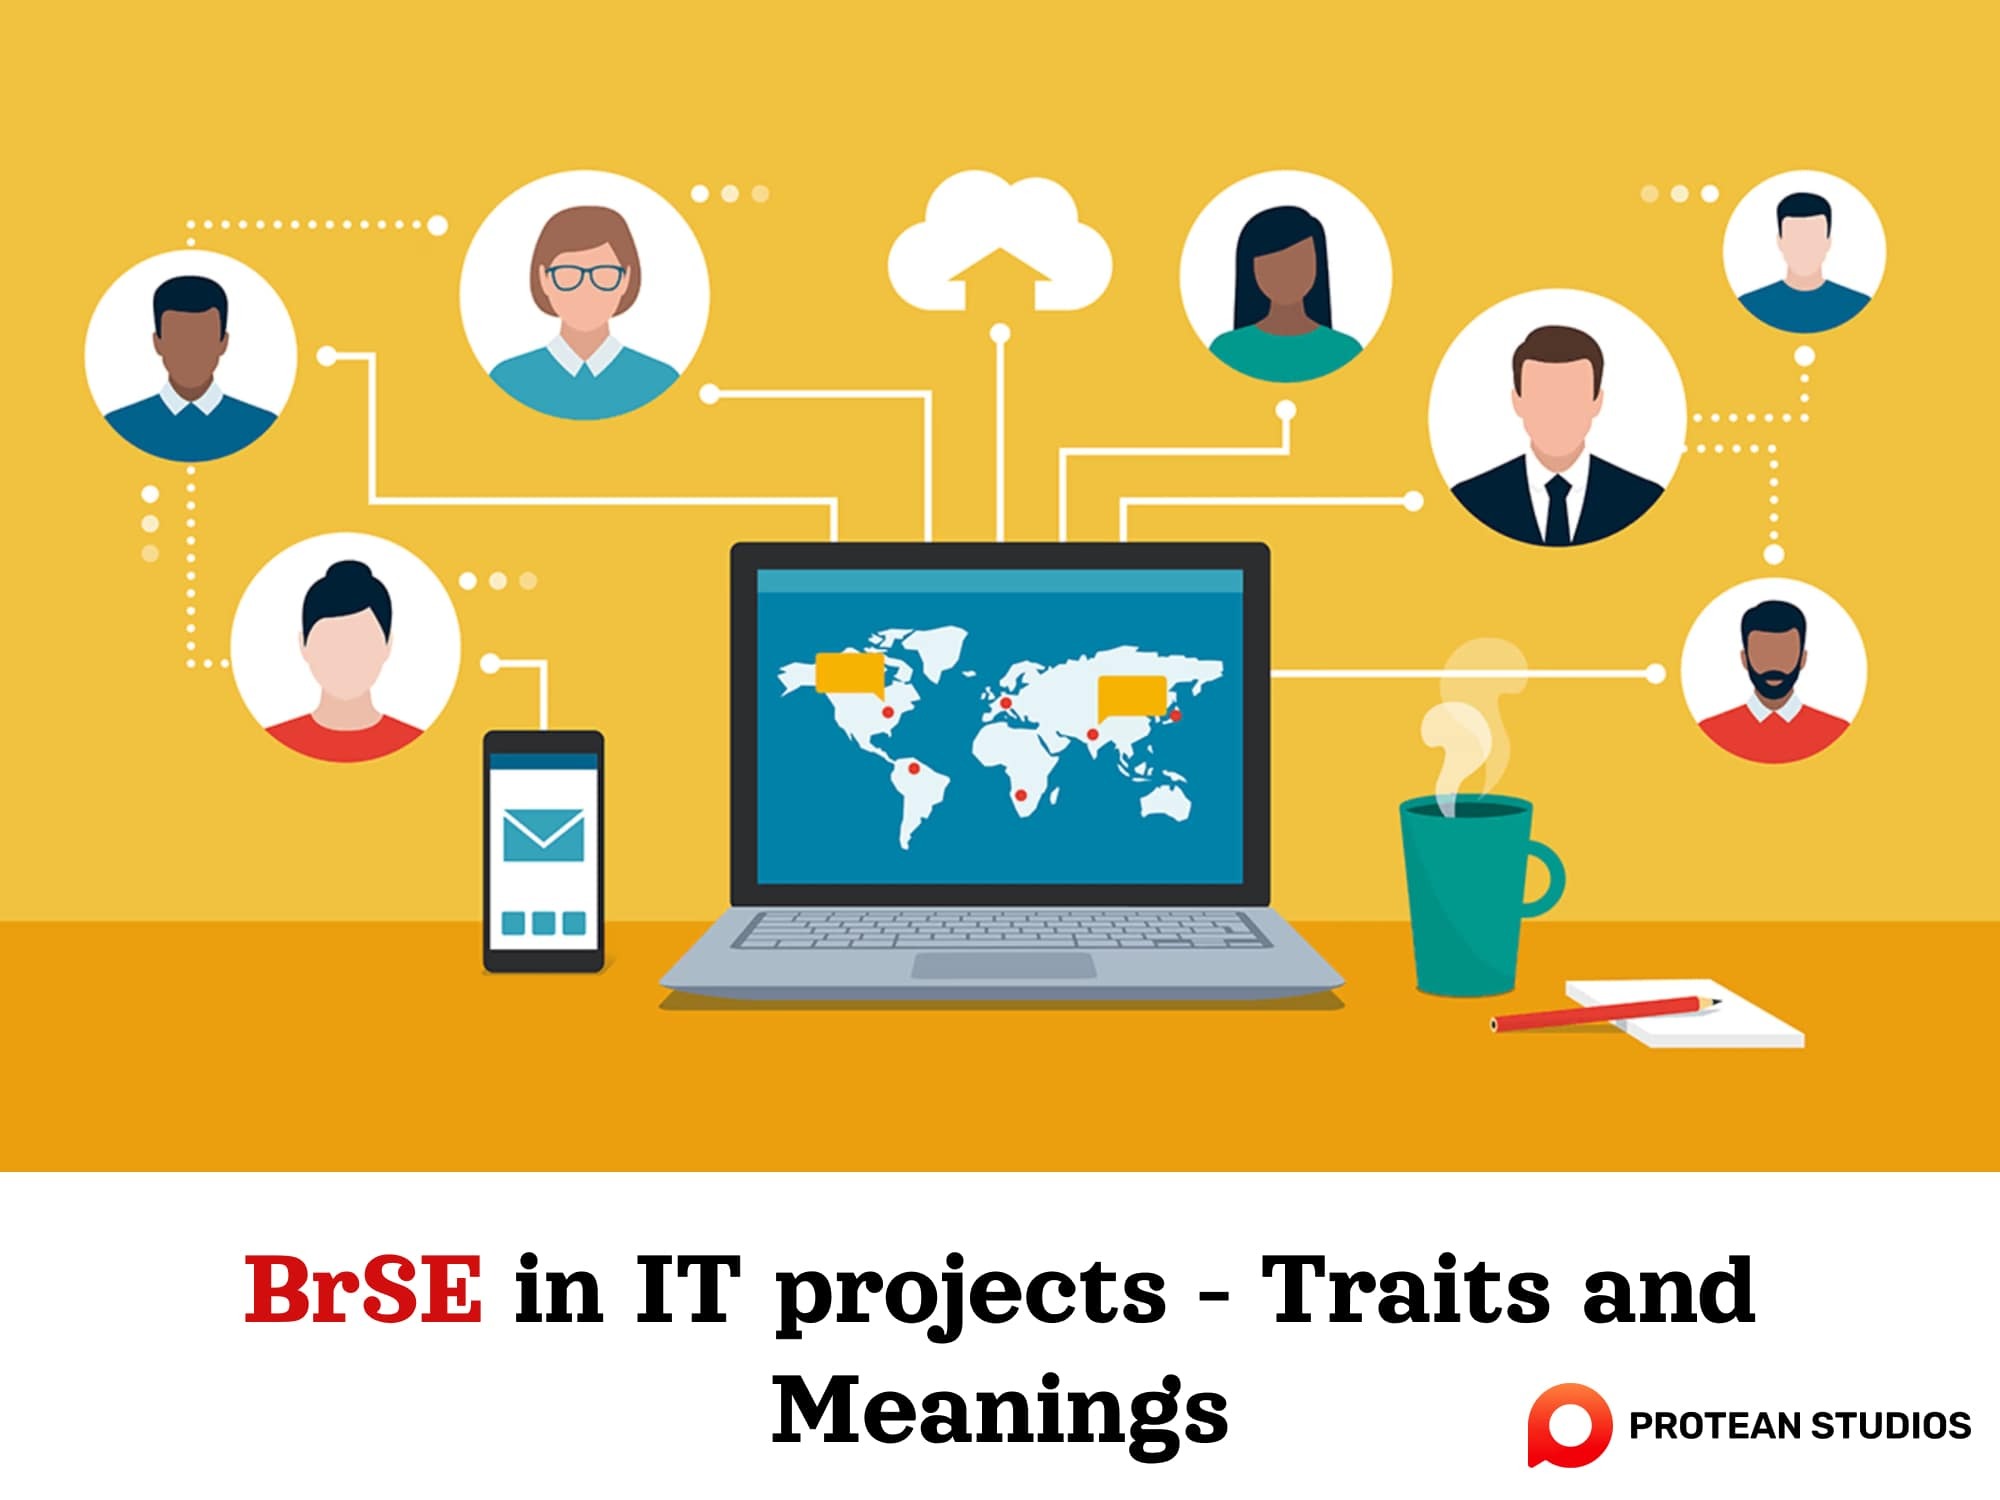 BrSE is who supports much more IT projects